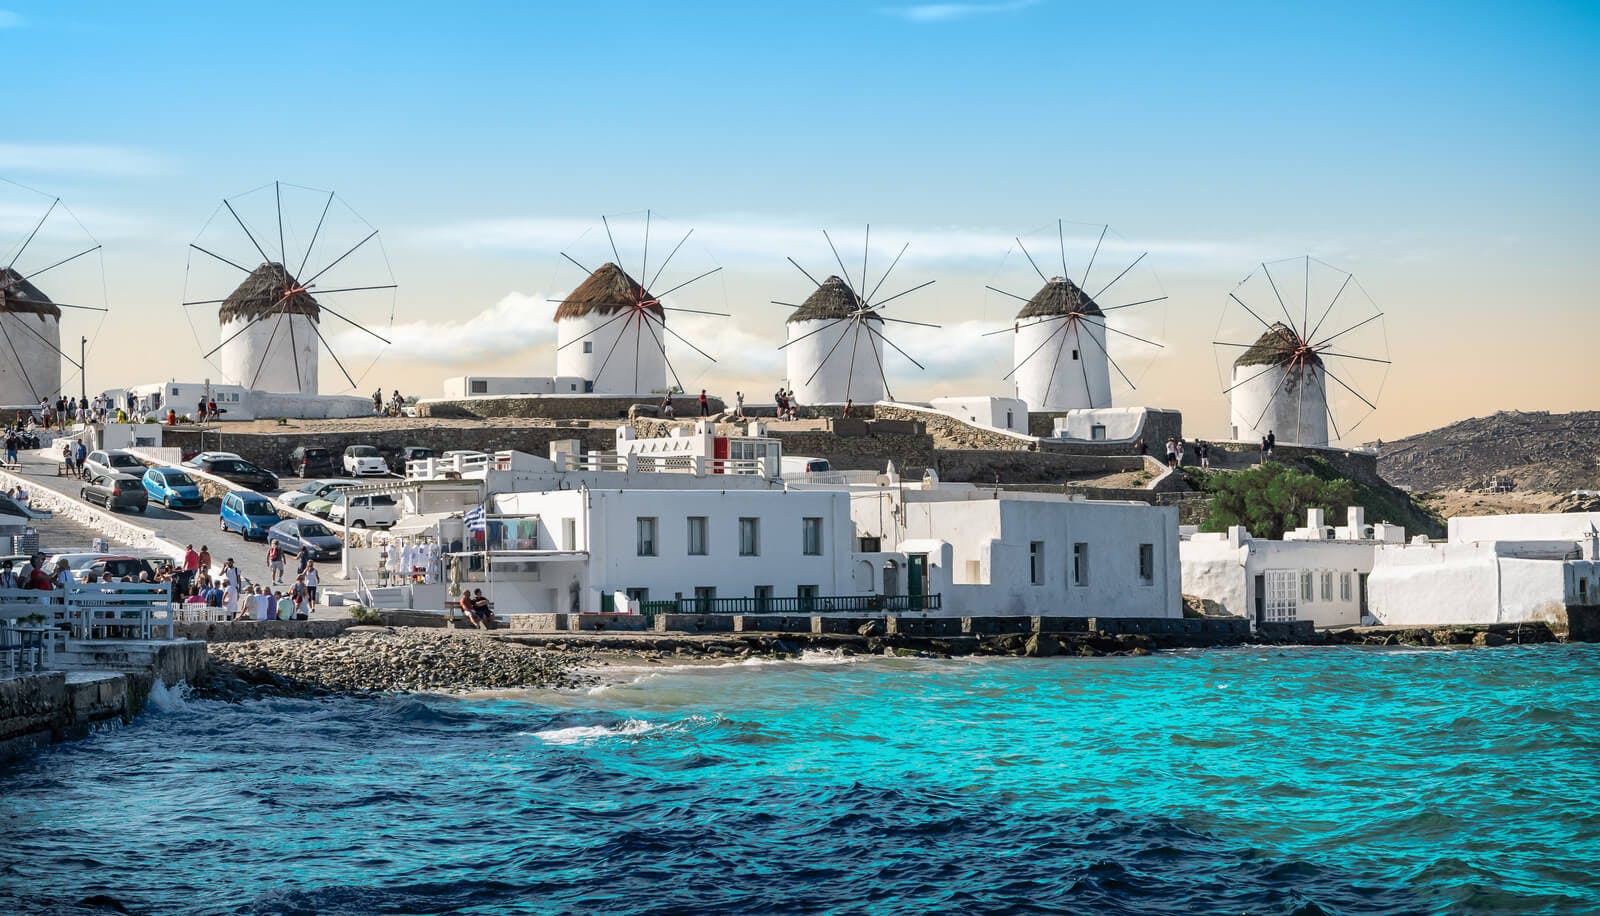 Mykonos' famous windmills by the old town harbor